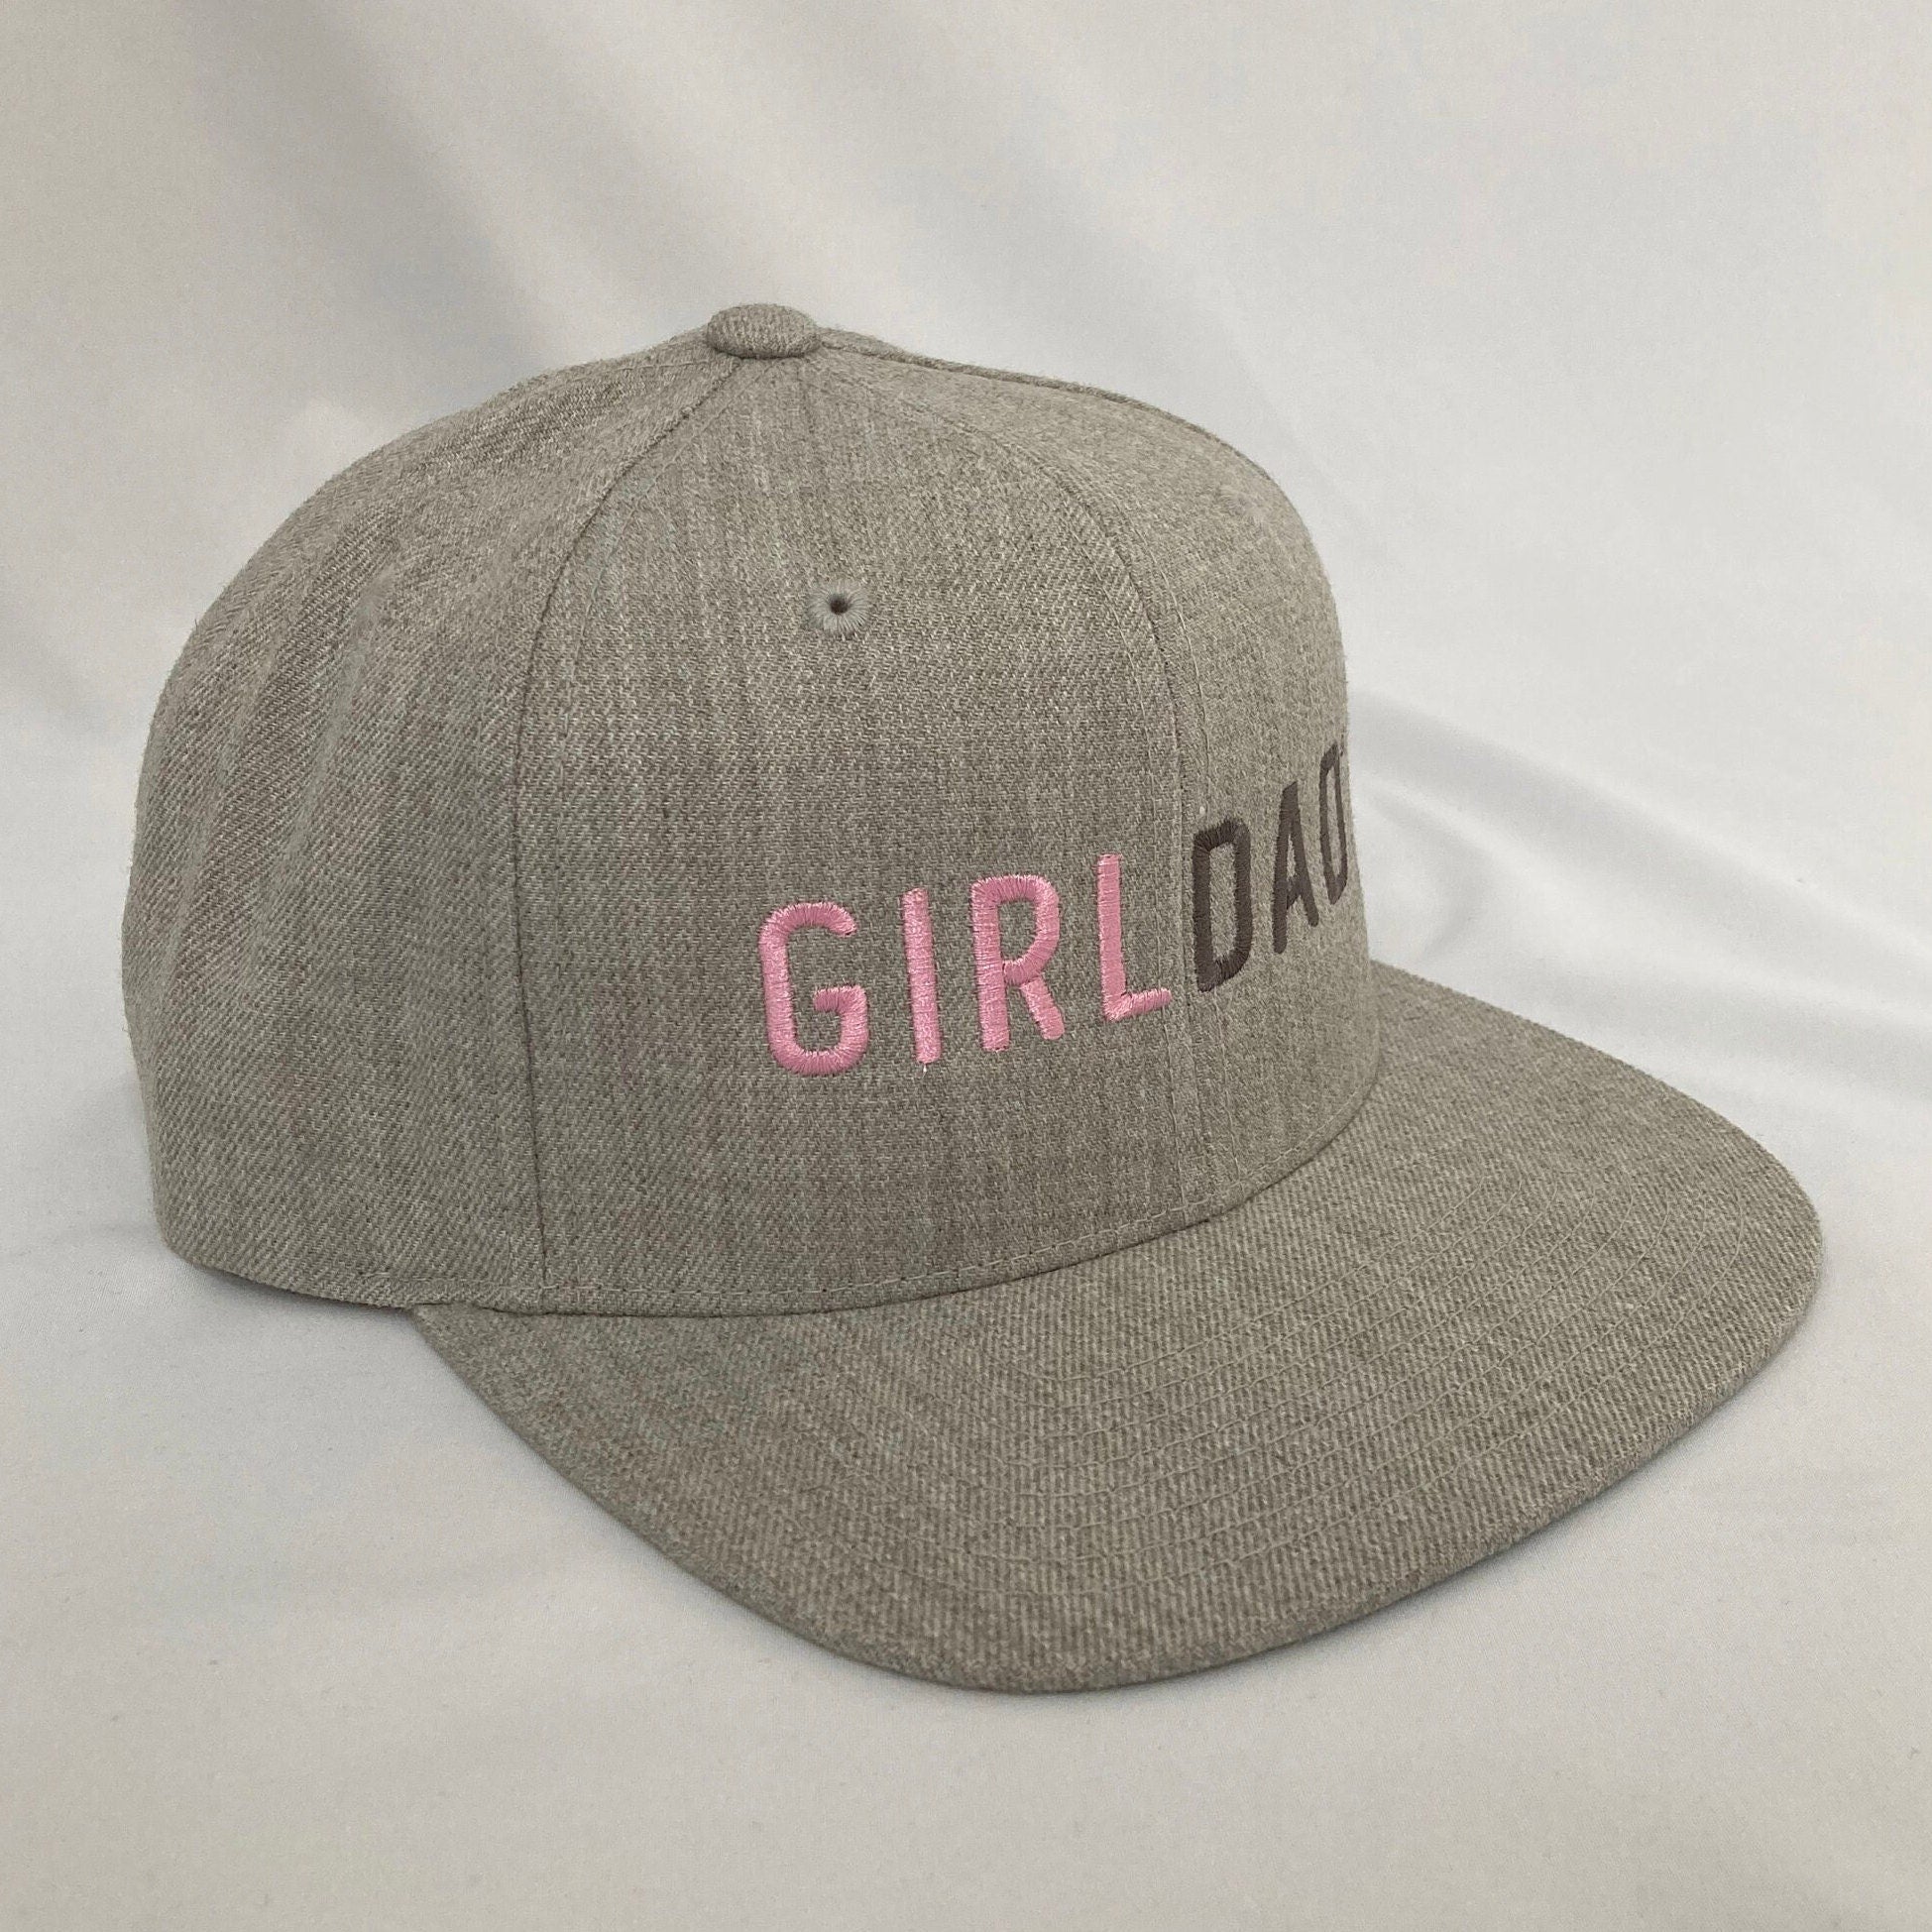 Girldad® Heather Grey Flat Bill SnapBack Hat Trucker Hat with Pink and Charcoal Embroidery